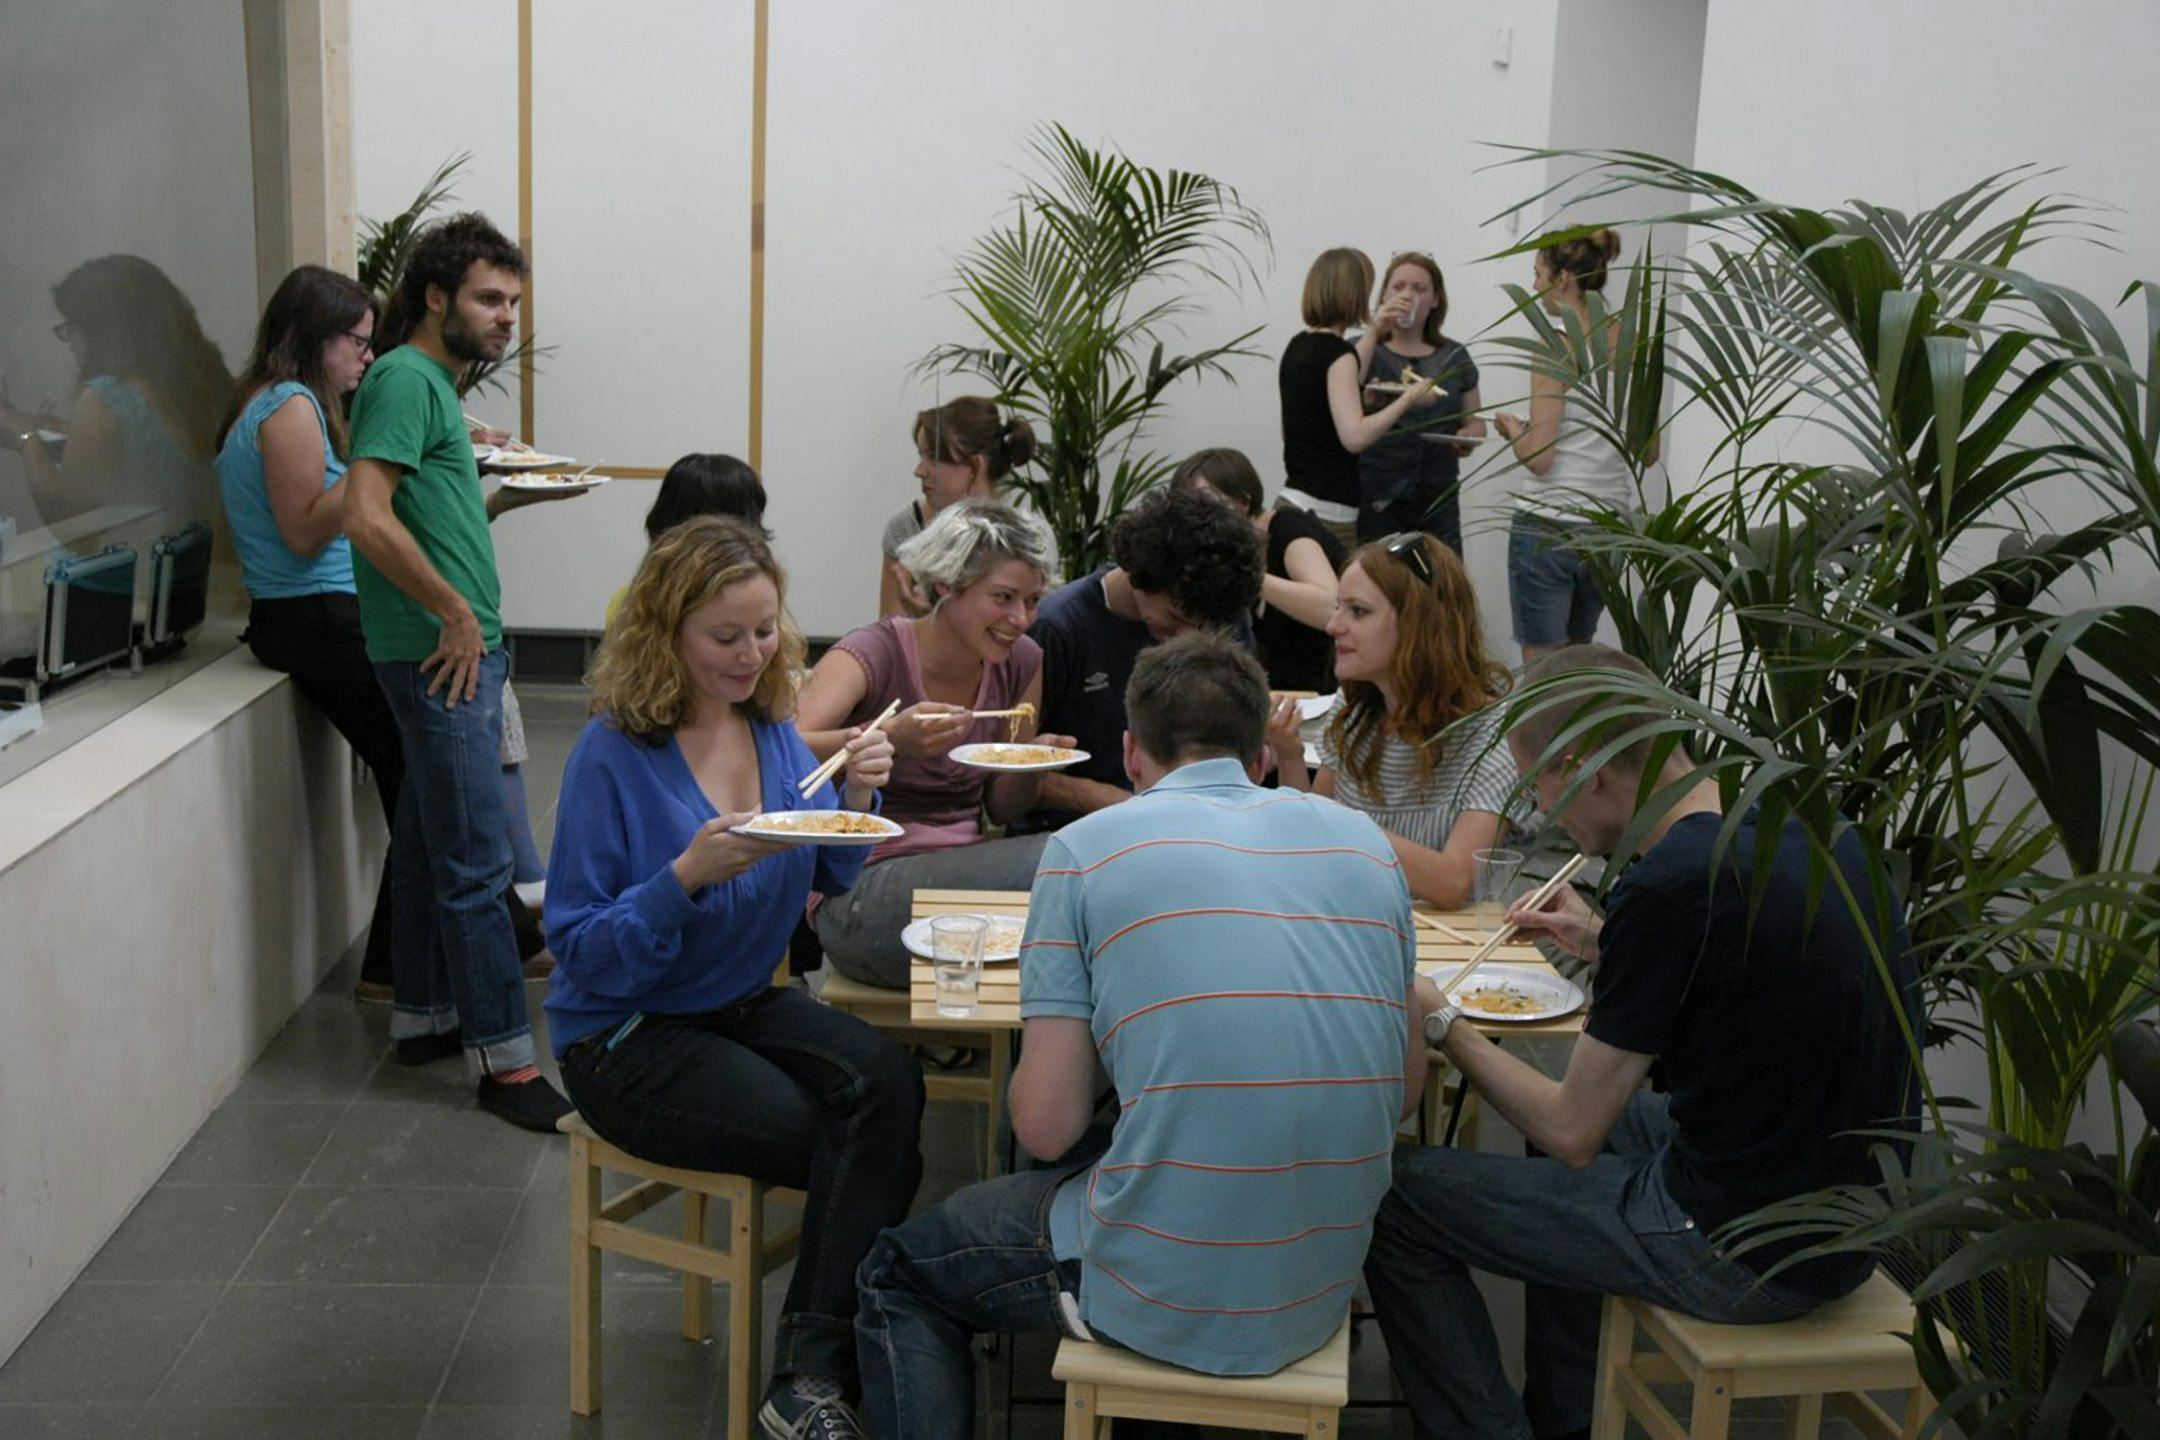 Installation view of viewers interacting within the exhibition Rirkrit Tiravinija at Serpentine Gallery, London, dated 2005.